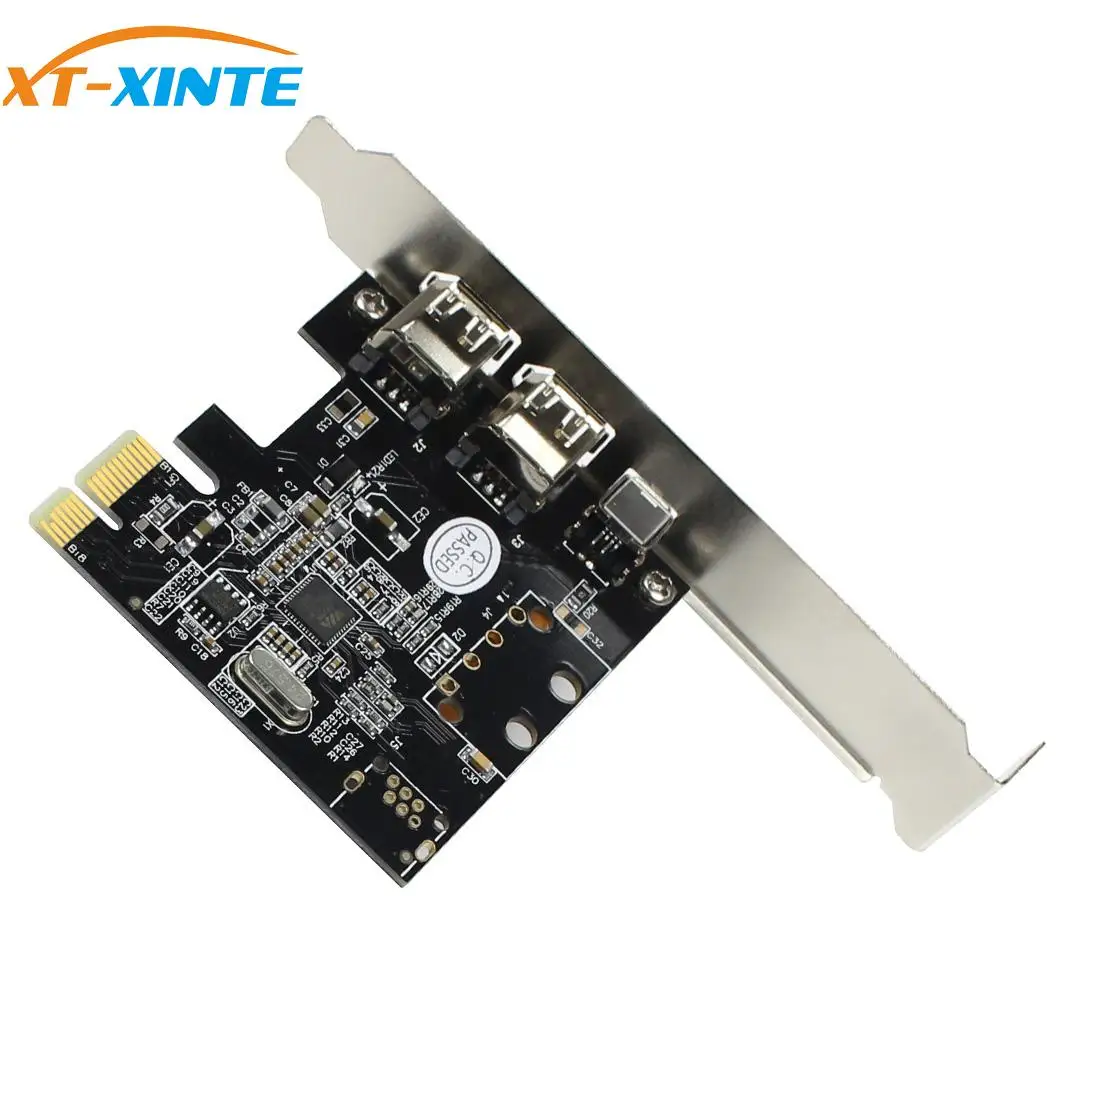 

XT-XINTE Expansion Card PCIe Combo 3 Ports 1394A 1x 4Pin 2x 6Pin PCI Express to IEEE 1394 Adapter Controller for Firewire PC